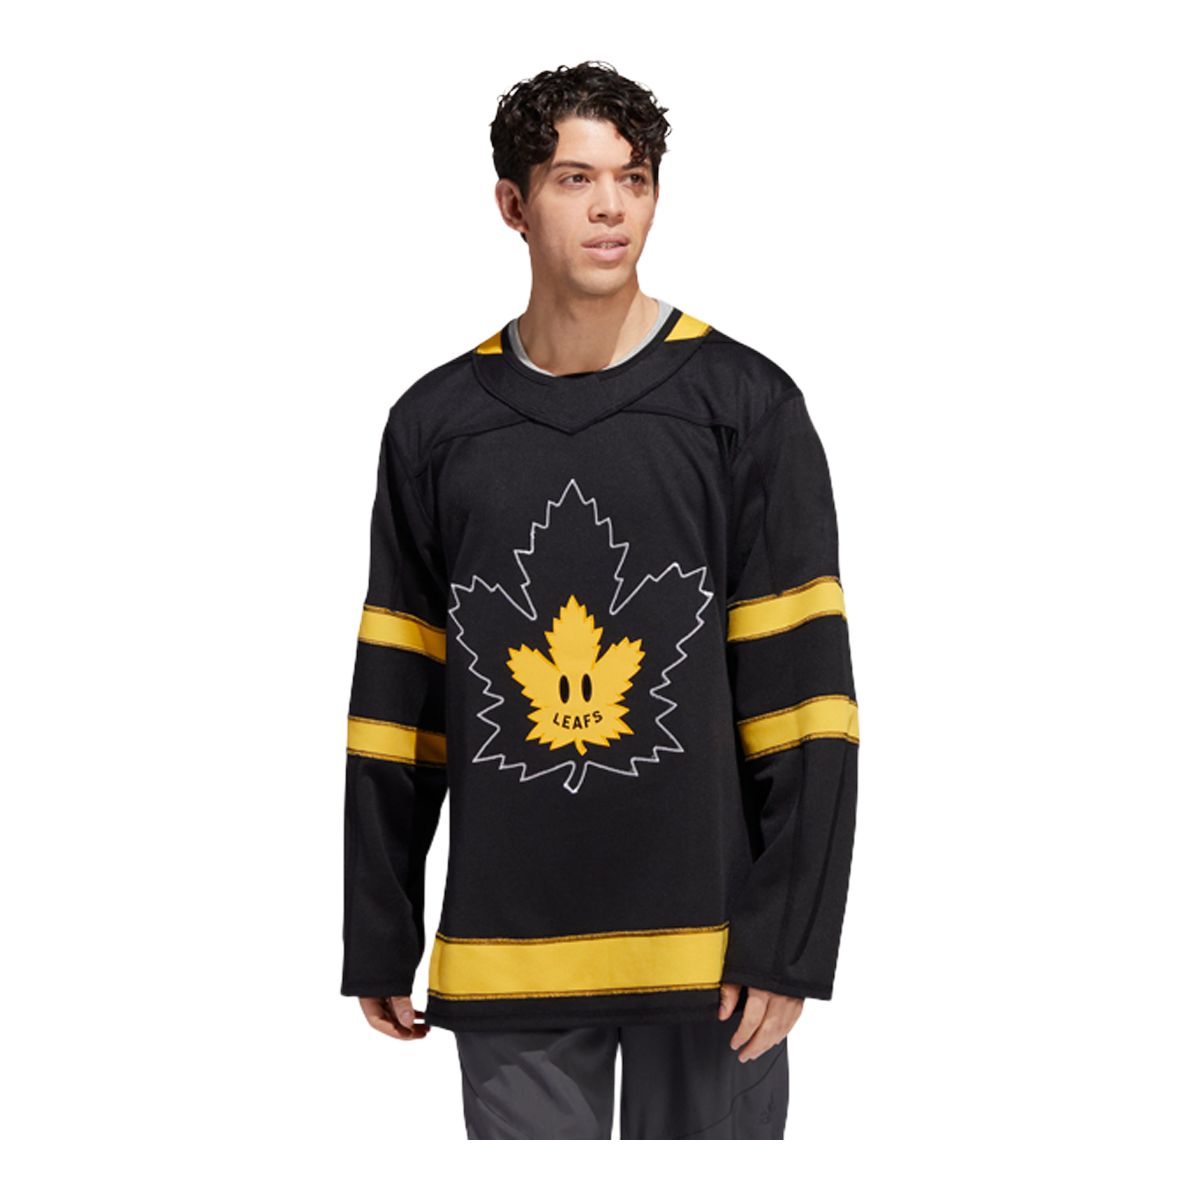 Toronto Maple Leafs Drew House Gold Justin Jersey shirt, hoodie